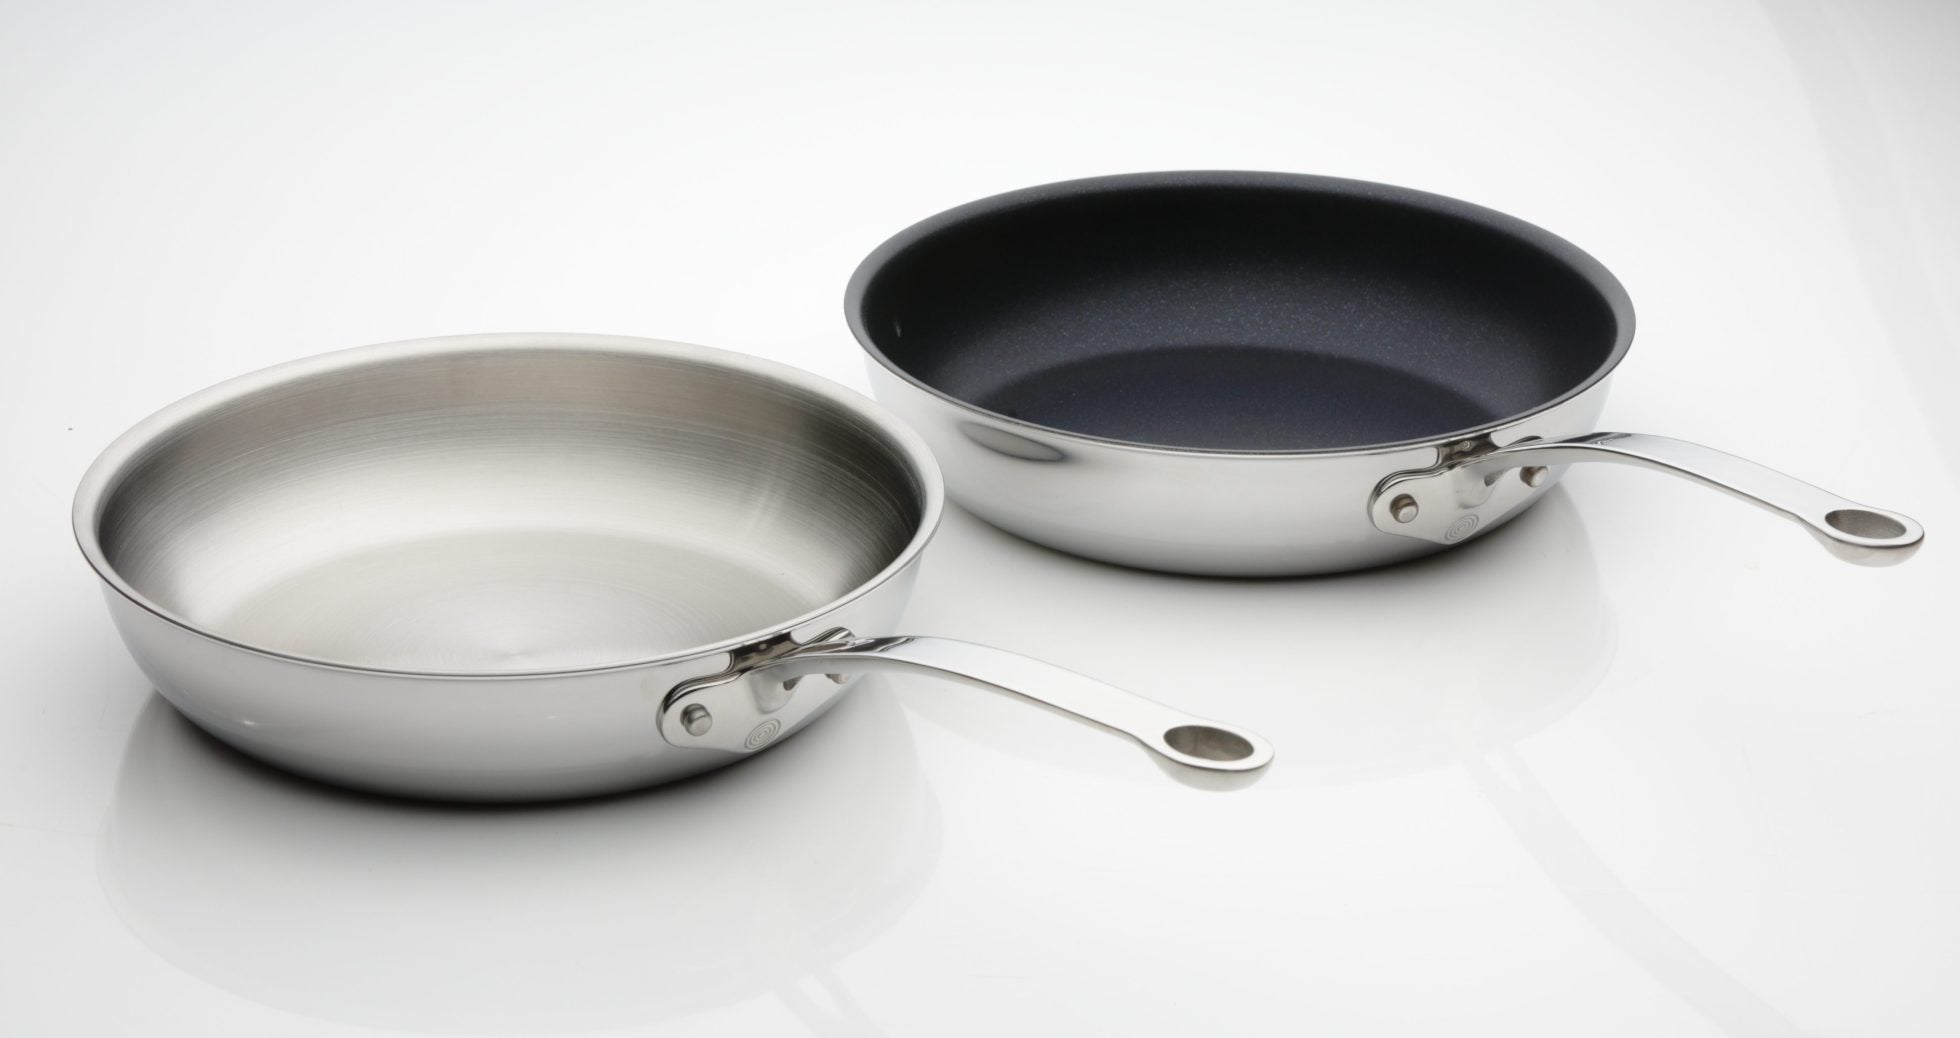 1*small Frying Pan Stainless-Steel Non-stick Pan,12cm/14cm/16cm